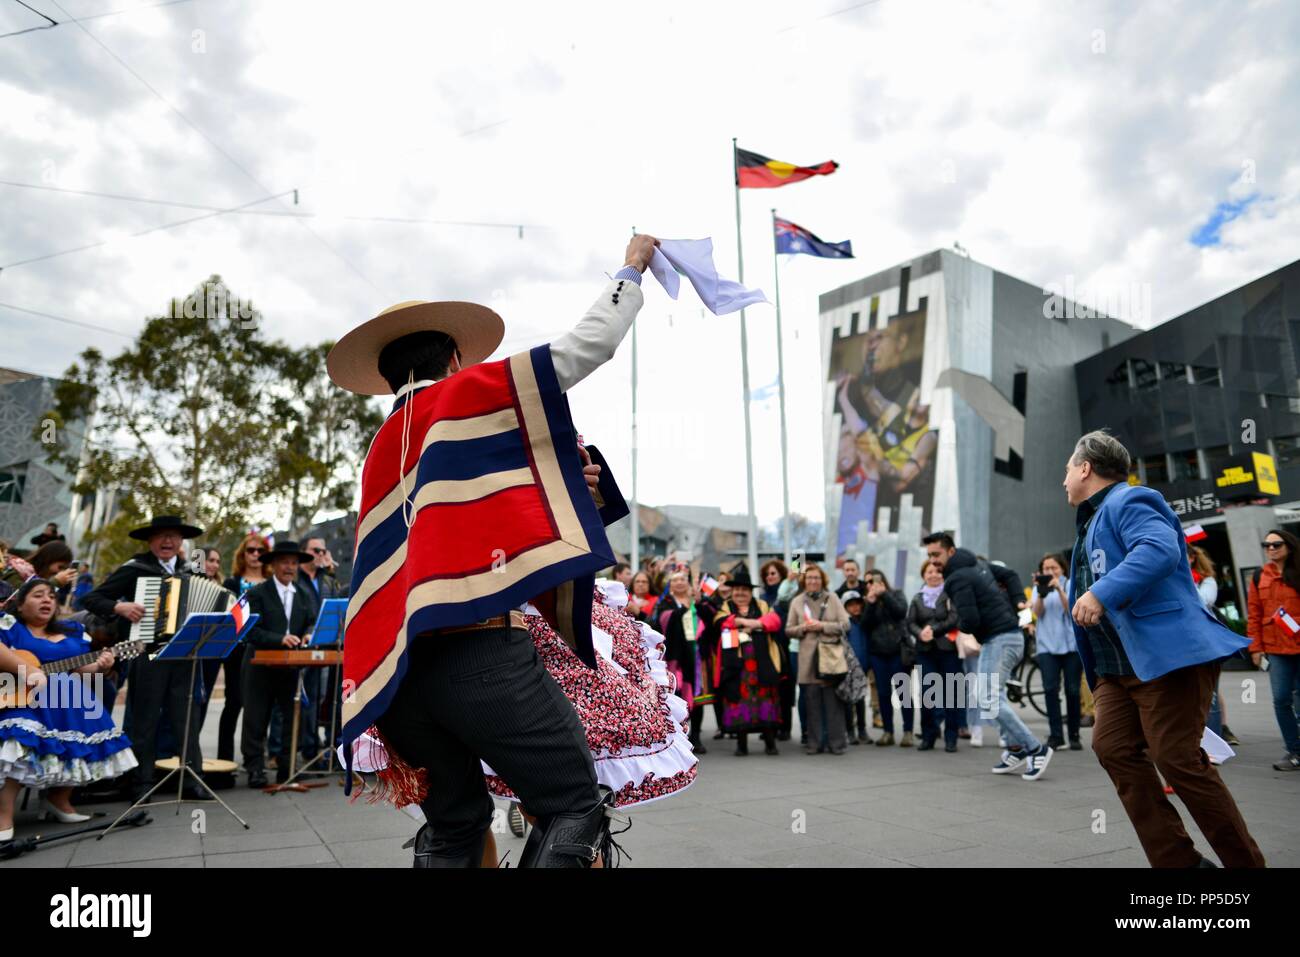 Fiestas Patrias, the native land holidays, the Chilean national day celebration at Federation square in Melbourne VIC, Australia, september 18th 2018 Stock Photo